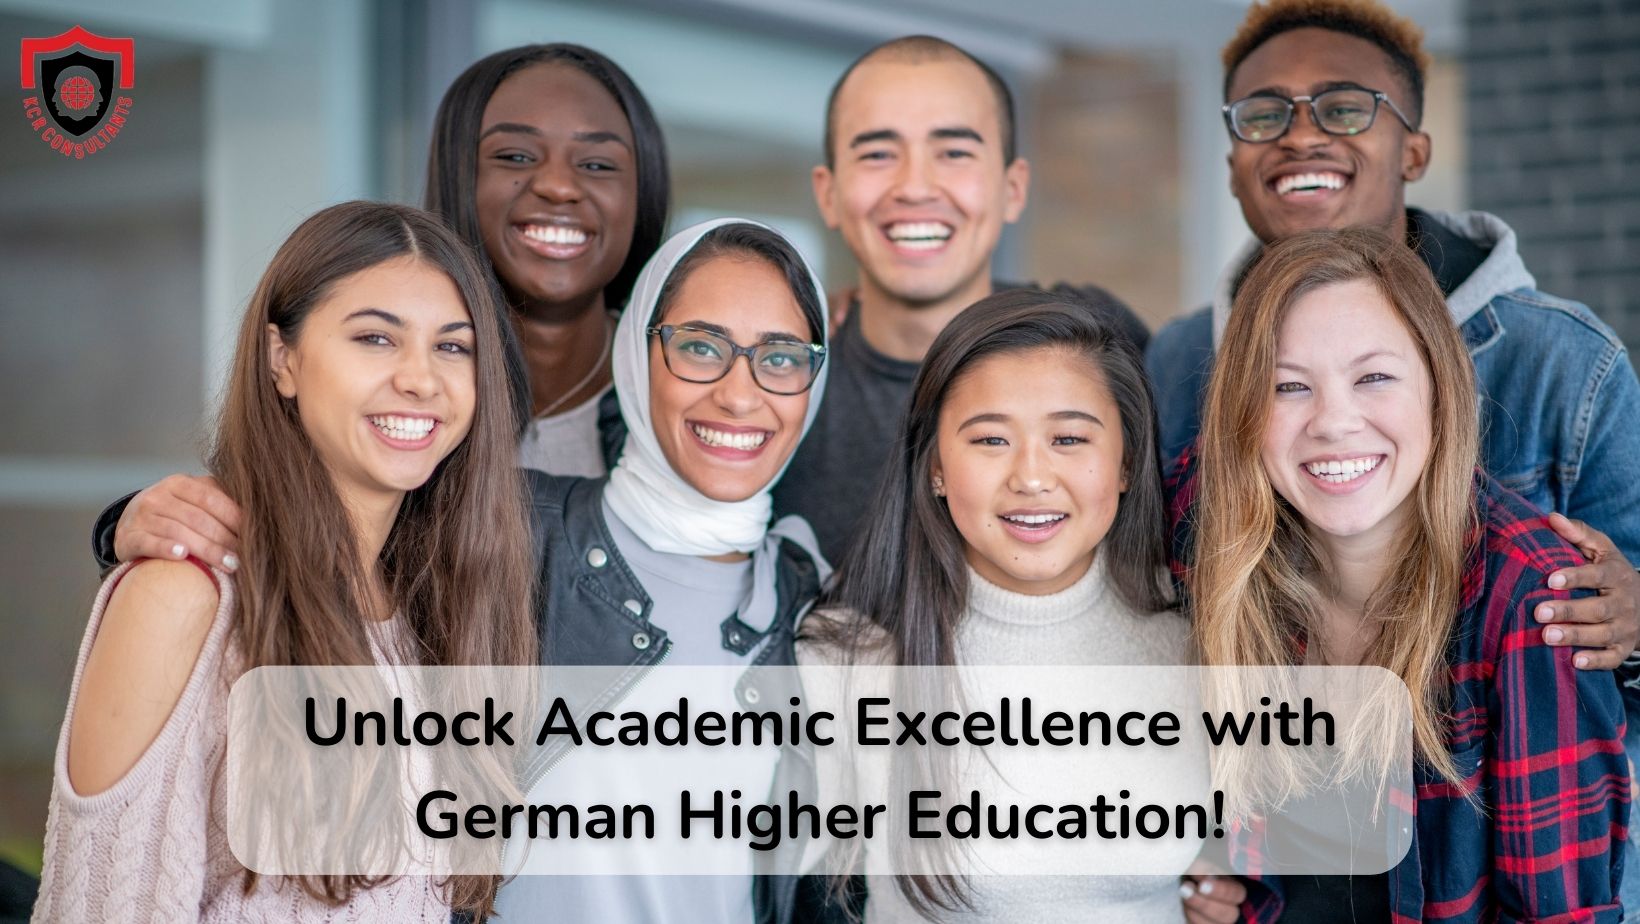 German Higher Education - KCR CONSULTANTS - Higher education opportunity for international students